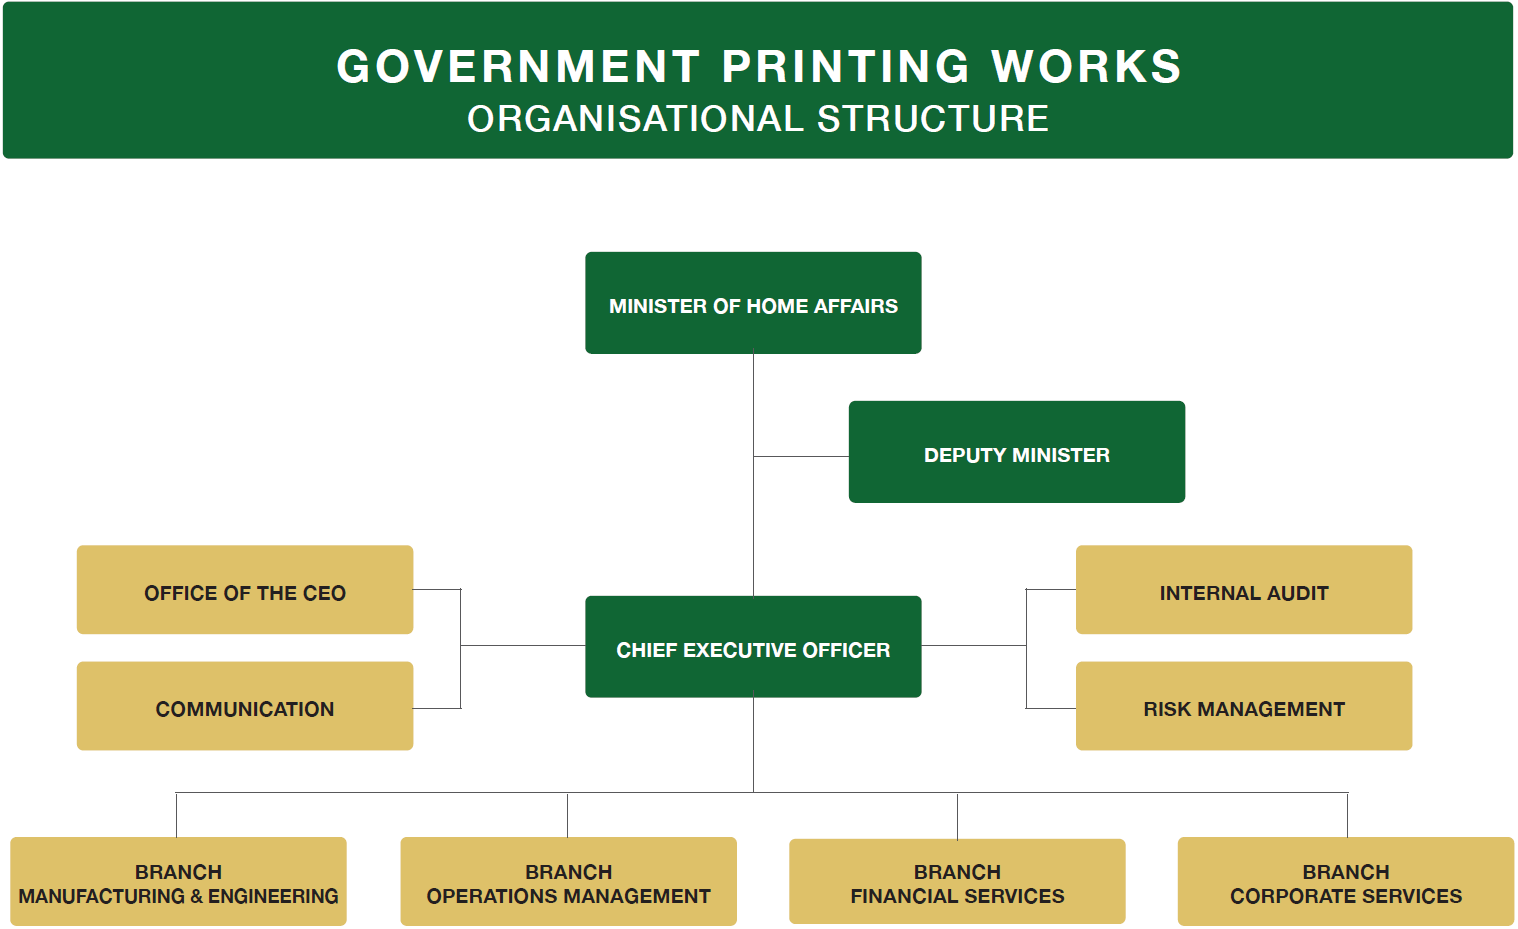 Government Printing Works - Organizational Structure